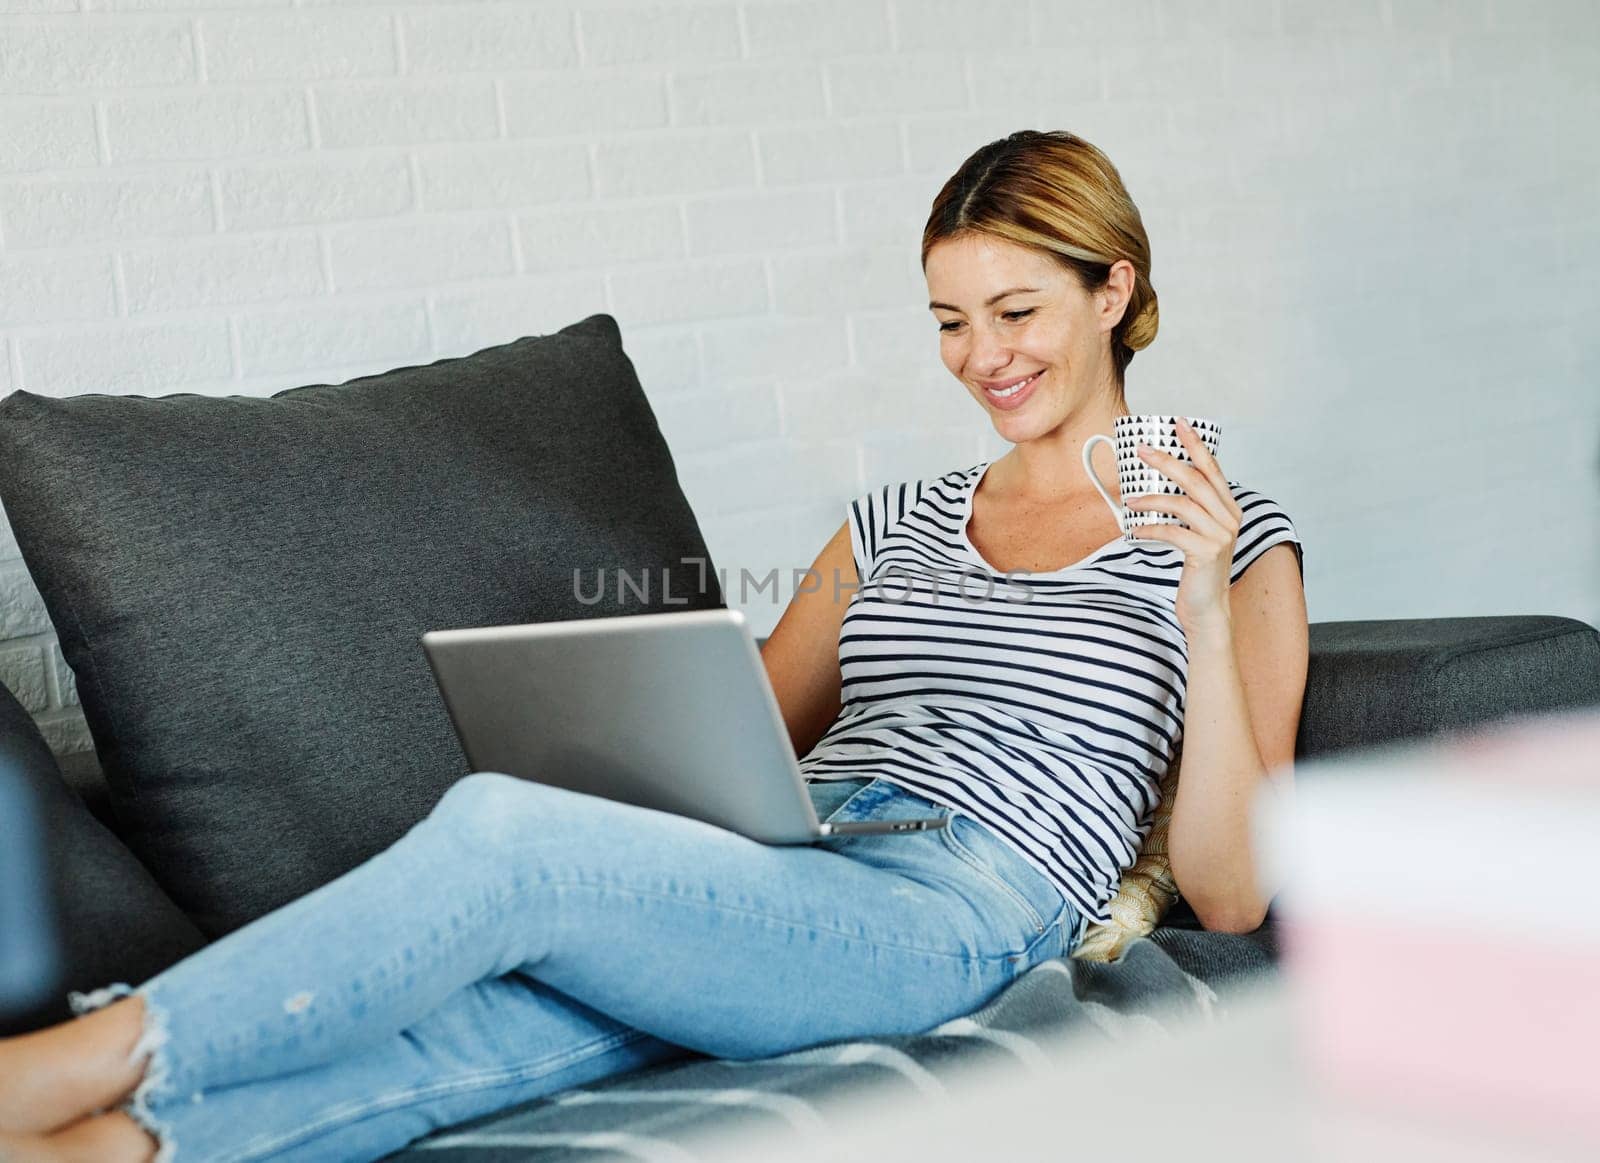 Woman Using Her Laptop On The Couch And Smiling